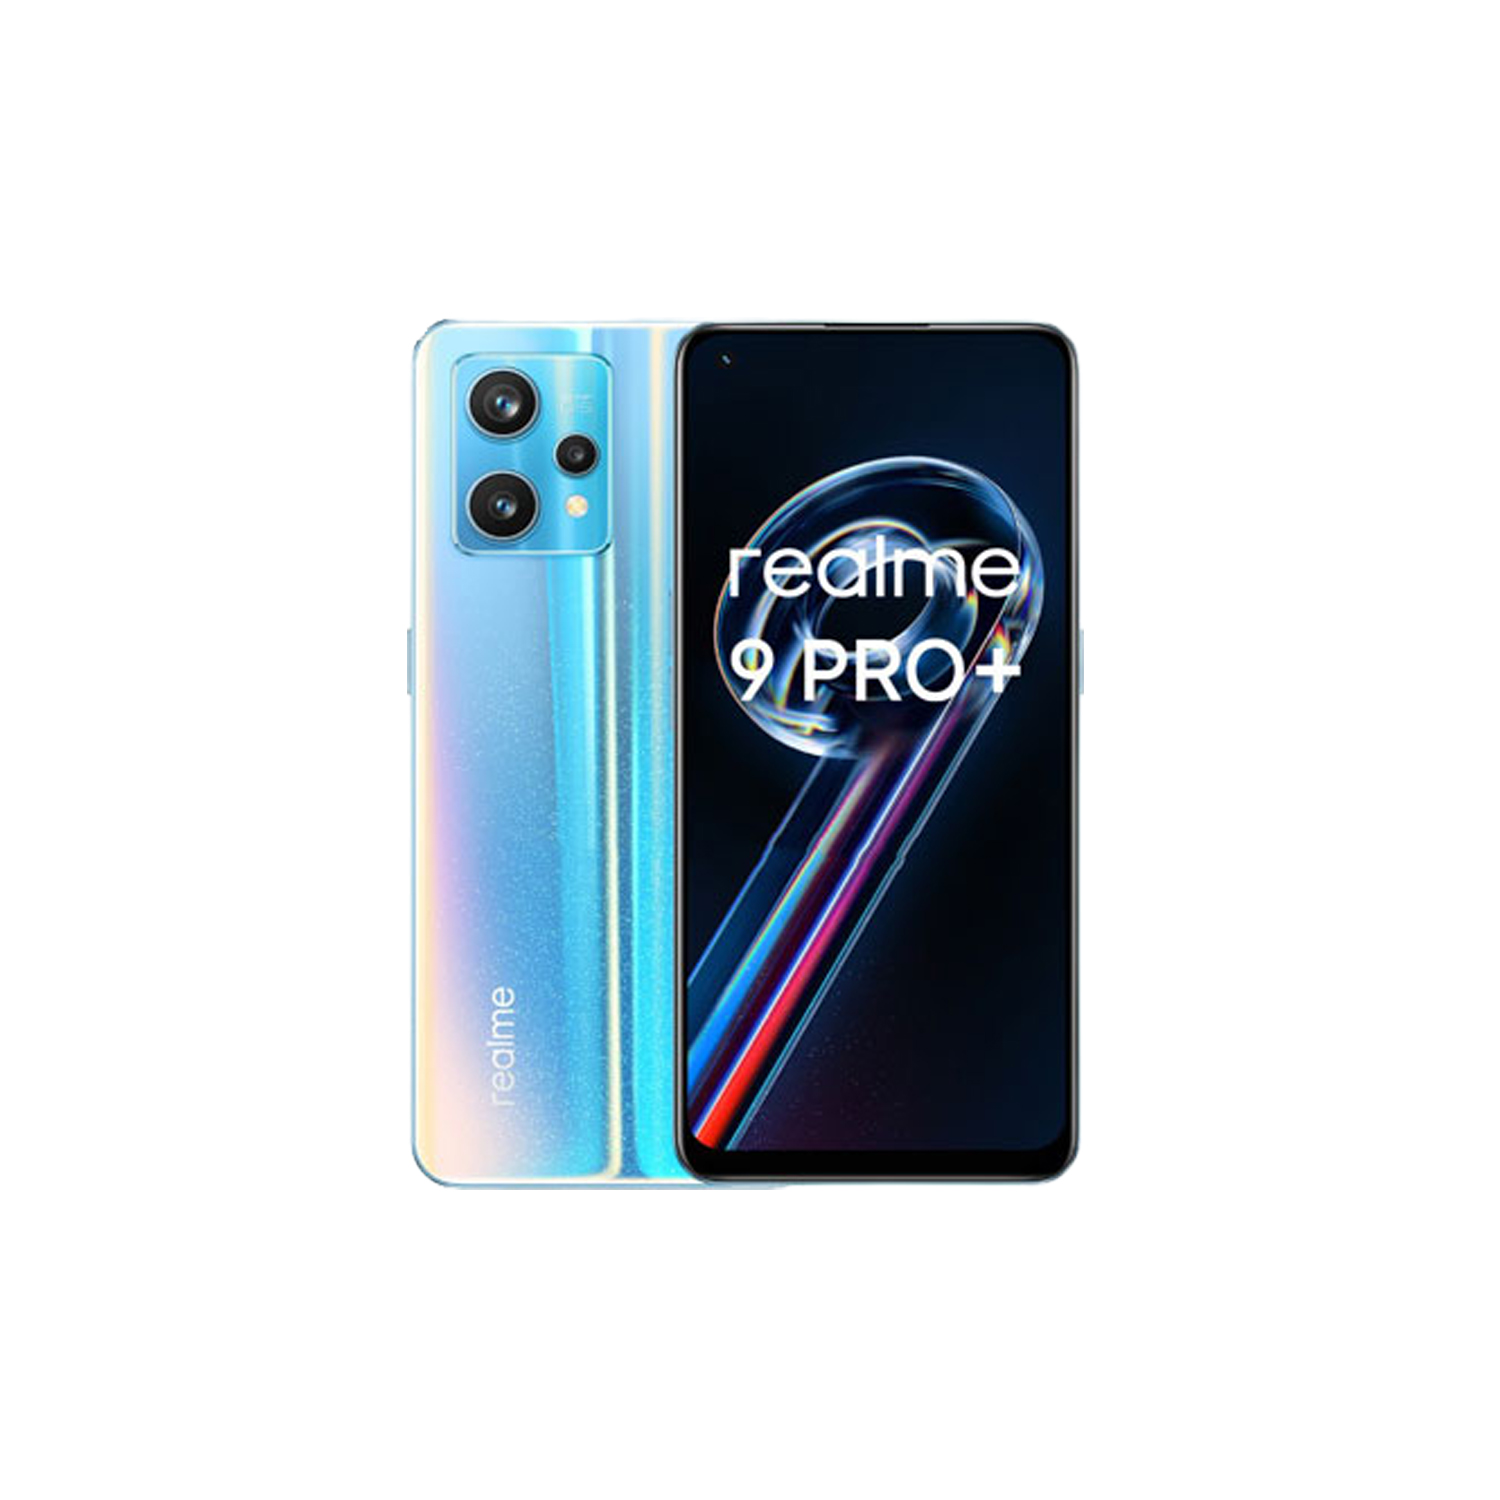 RealMe 9 Pro 5G (5000 mAh Battery, 128 GB Storage) Price and features